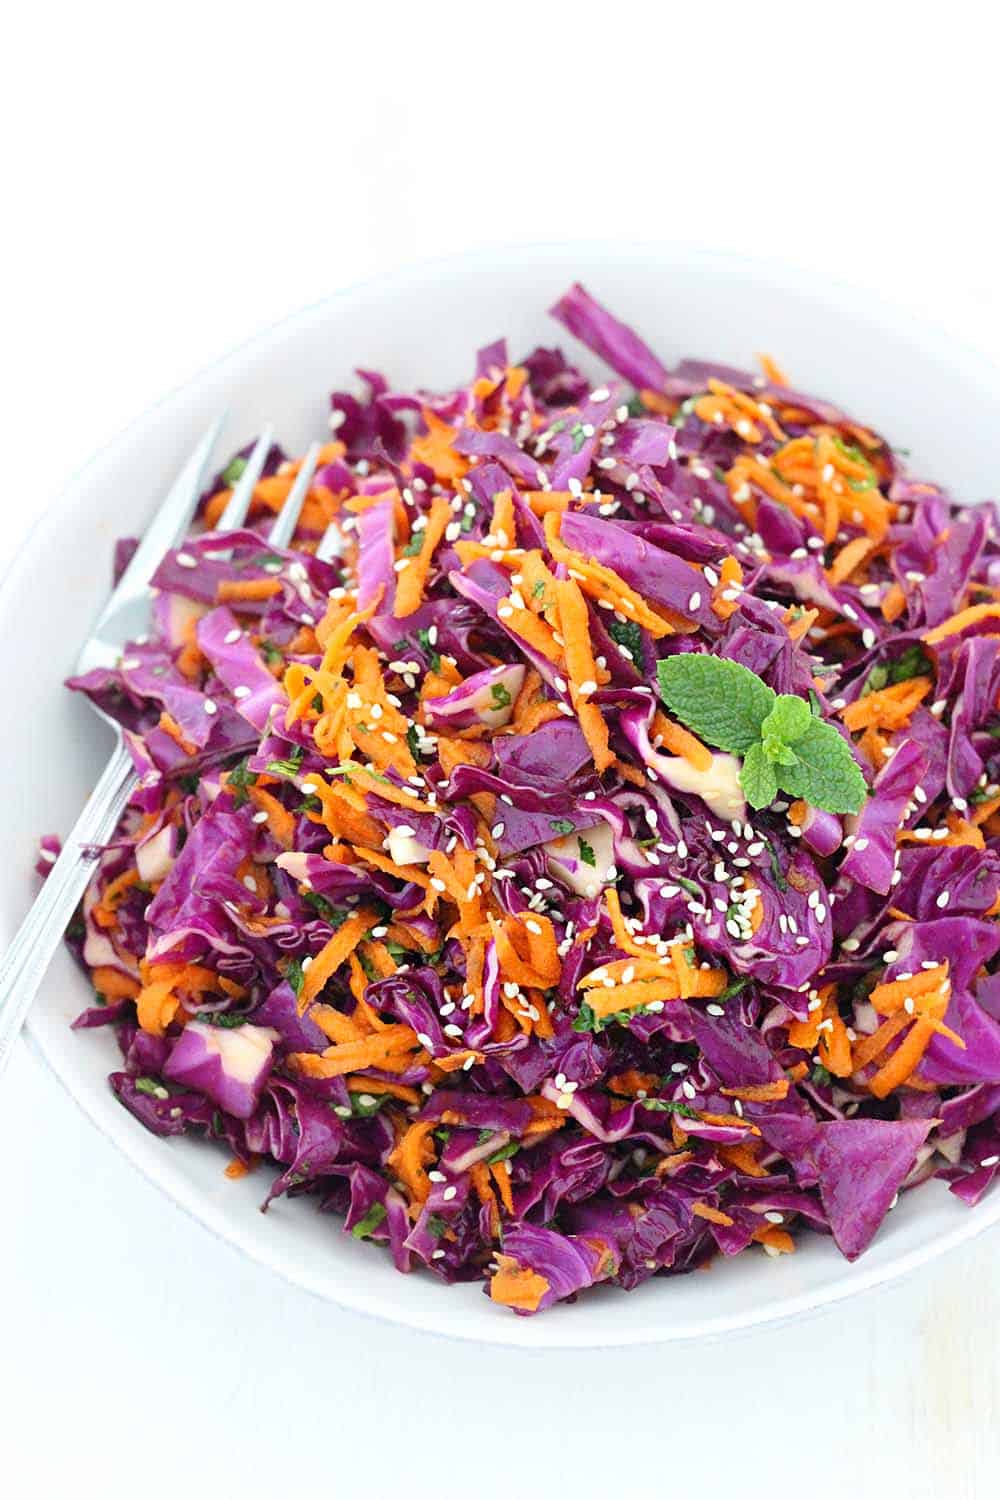 This Thai Sesame Red Cabbage and Carrot Salad recipe is cool, crunchy, healthy, and refreshing. Packed with flavor from fresh mint, basil, and cilantro and a toasted sesame dressing!